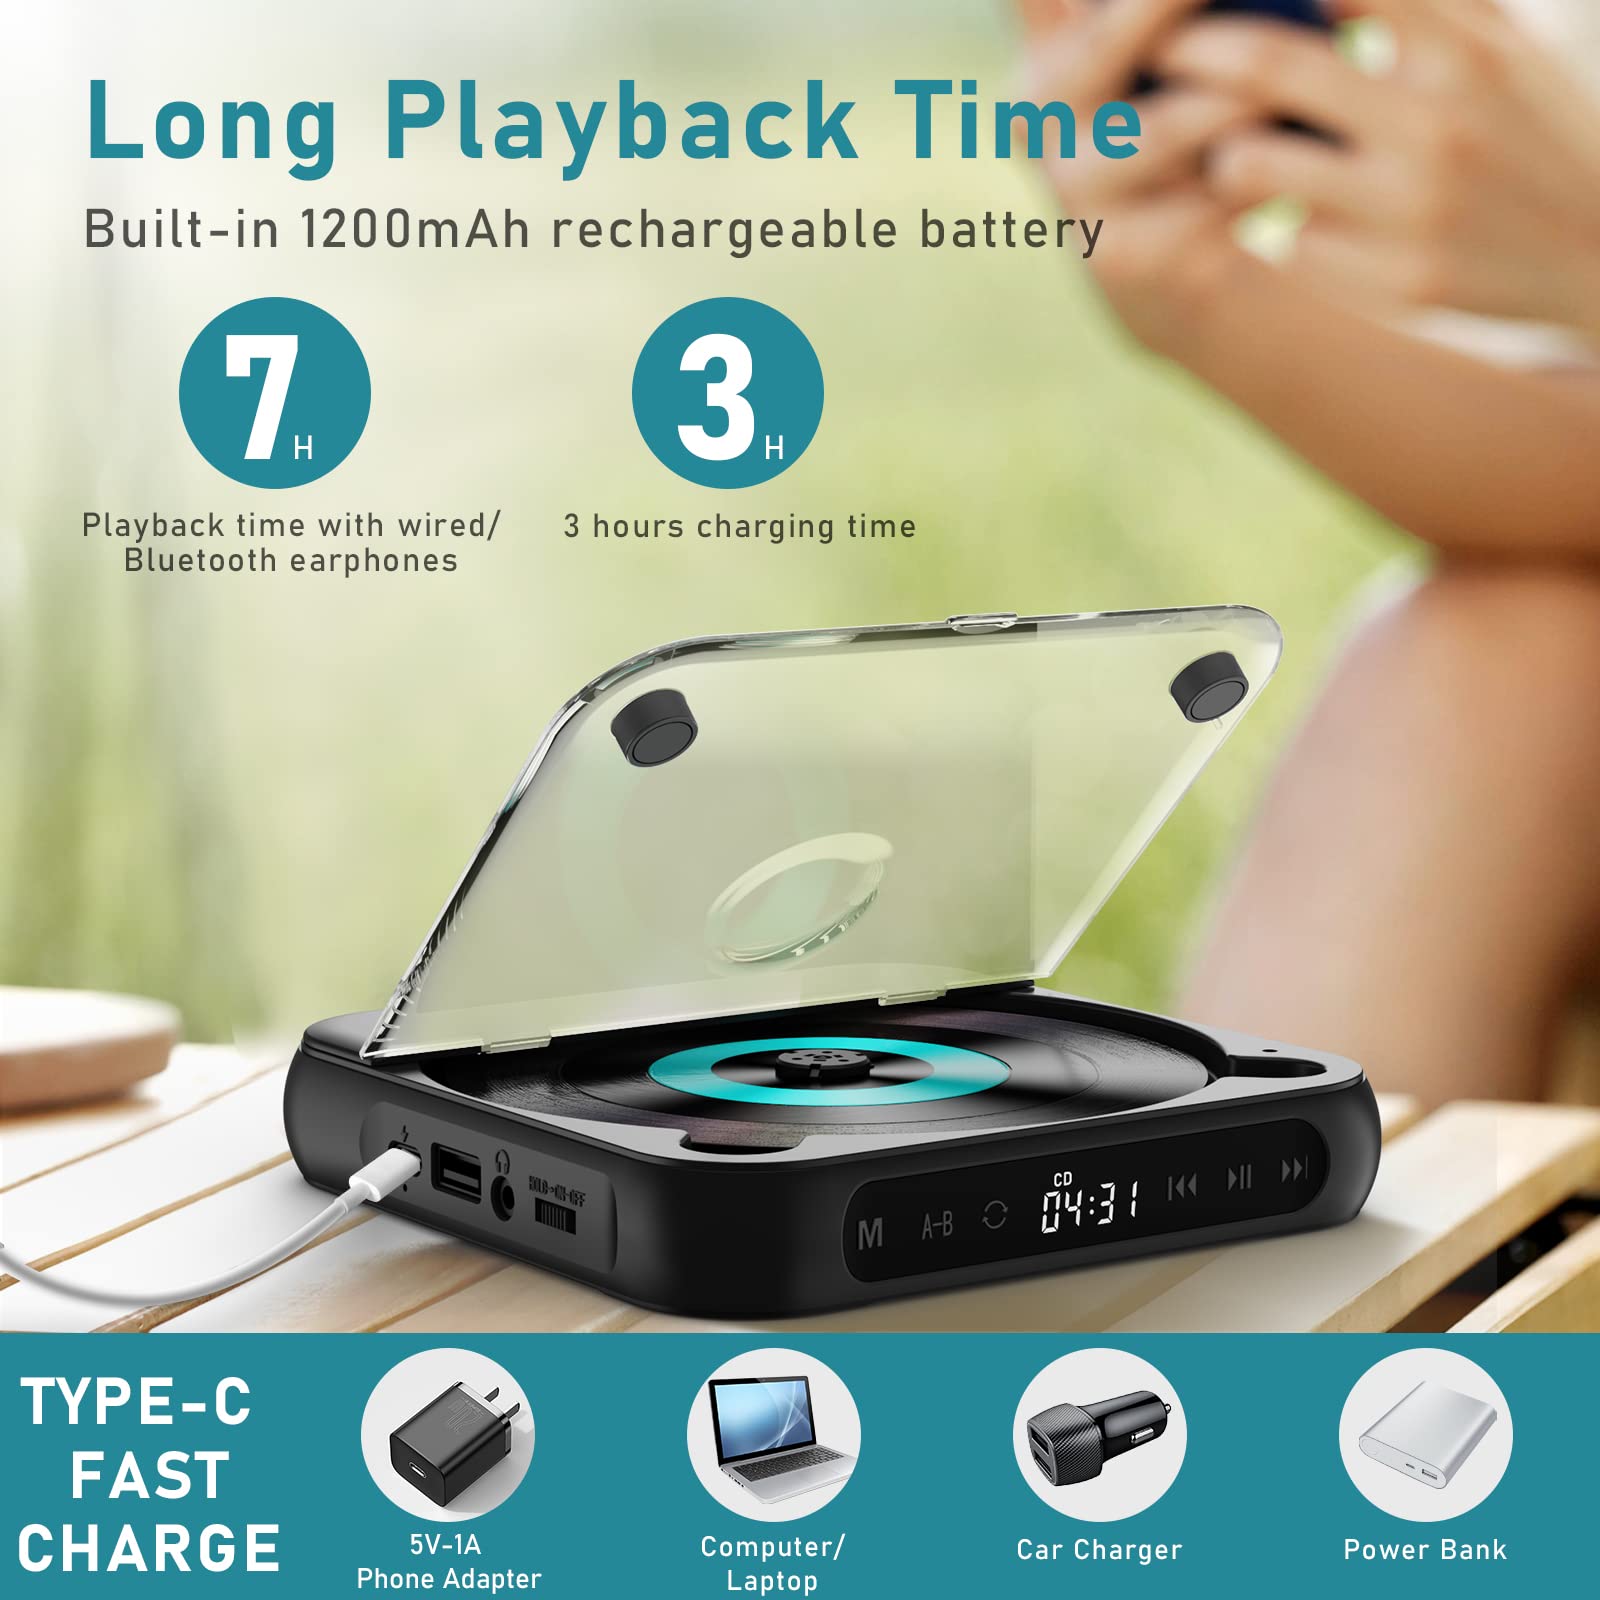 ZYOKATA Portable CD Player Personal CD Players with Bluetooth for Car, Rechargeable Small CD Player with Headphones, LCD Touch Screen & Anti-Skip/Shockproof